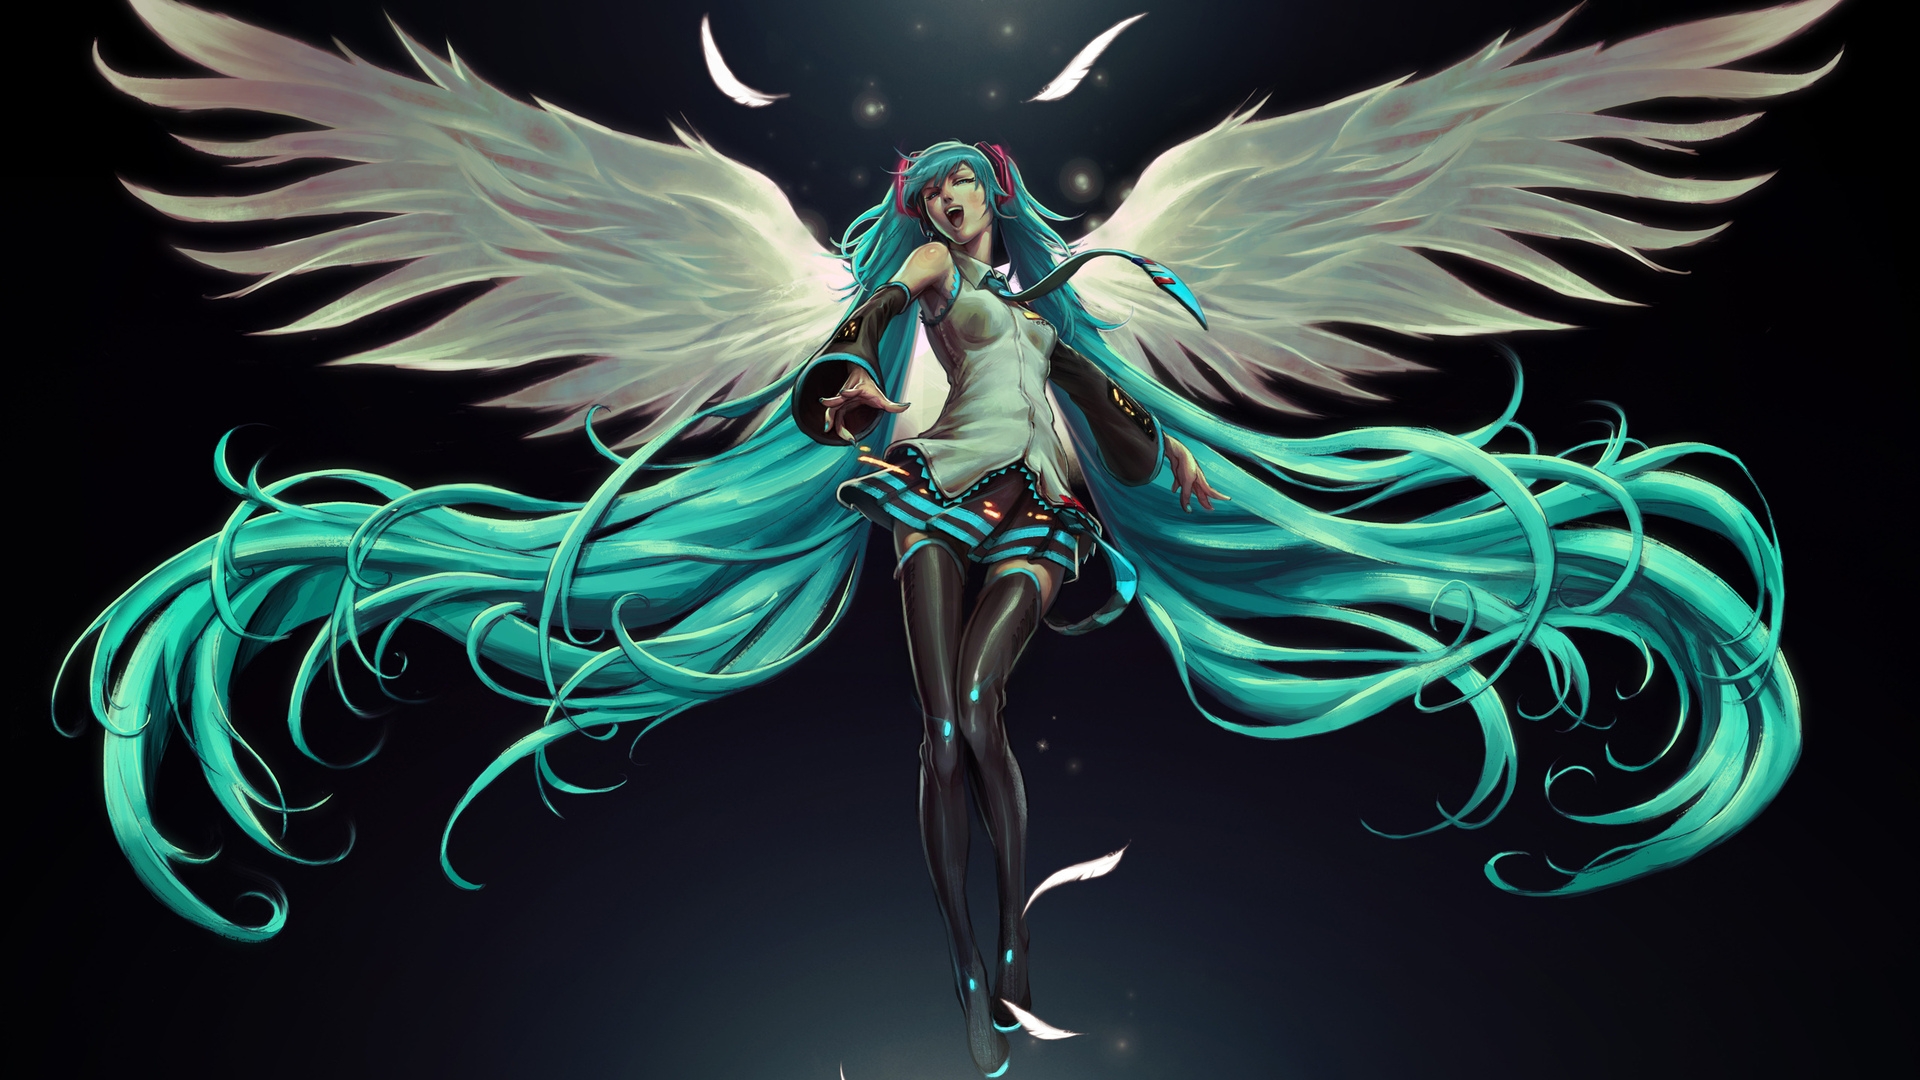 Hatsune Miku Vocal   High Definition Wallpapers   HD wallpapers